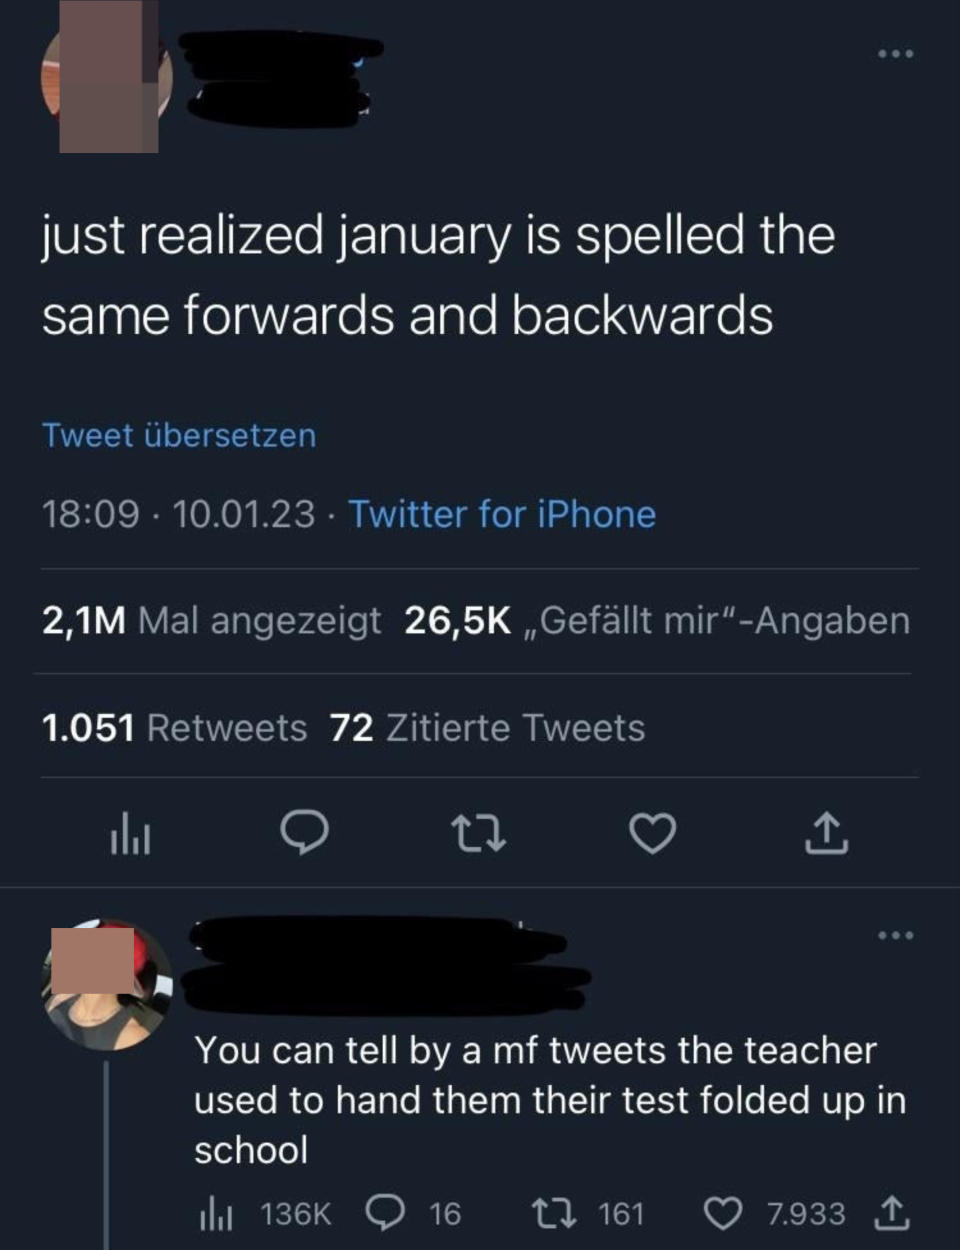 Someone says "just realized january is spelled the same forwards and backwards" and gets told "You can tell by a mf tweets the teacher used to hand back test test folded up in school"